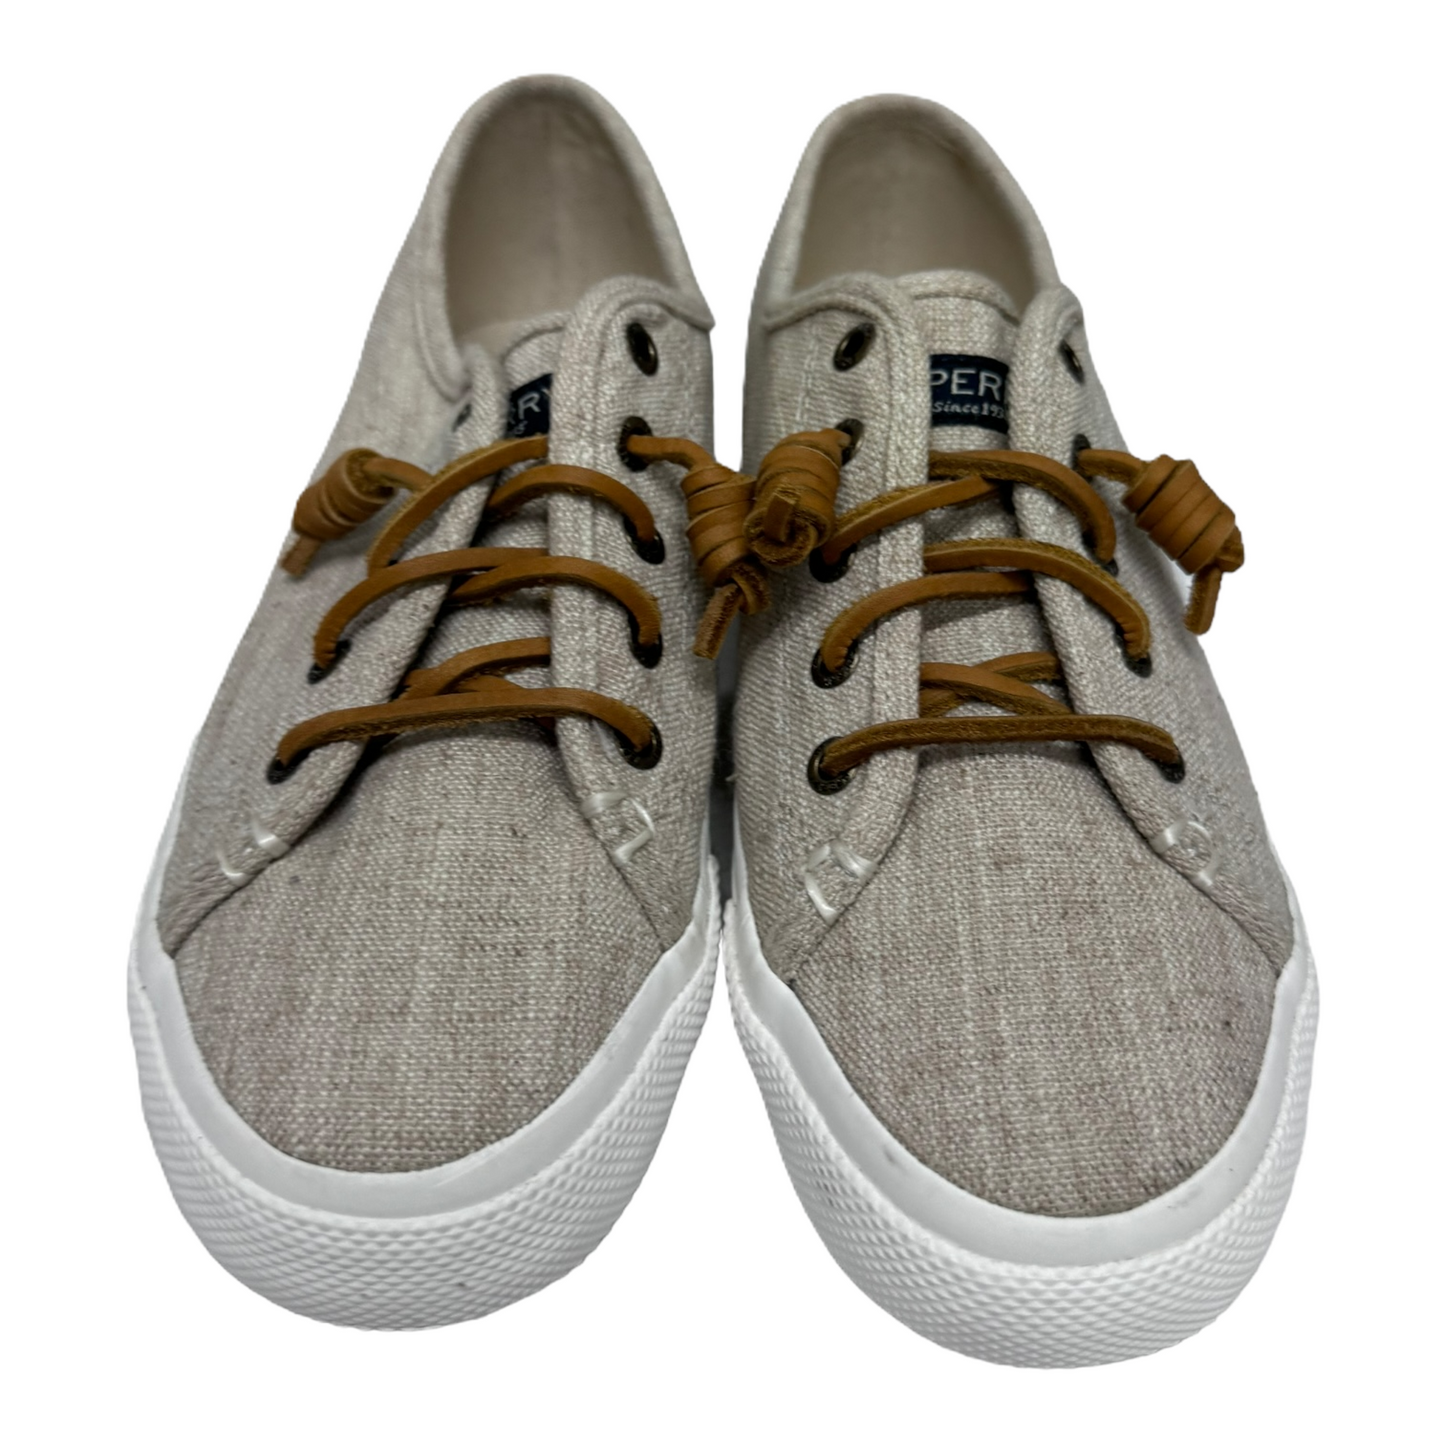 Beige Shoes Sneakers By Sperry, Size: 7